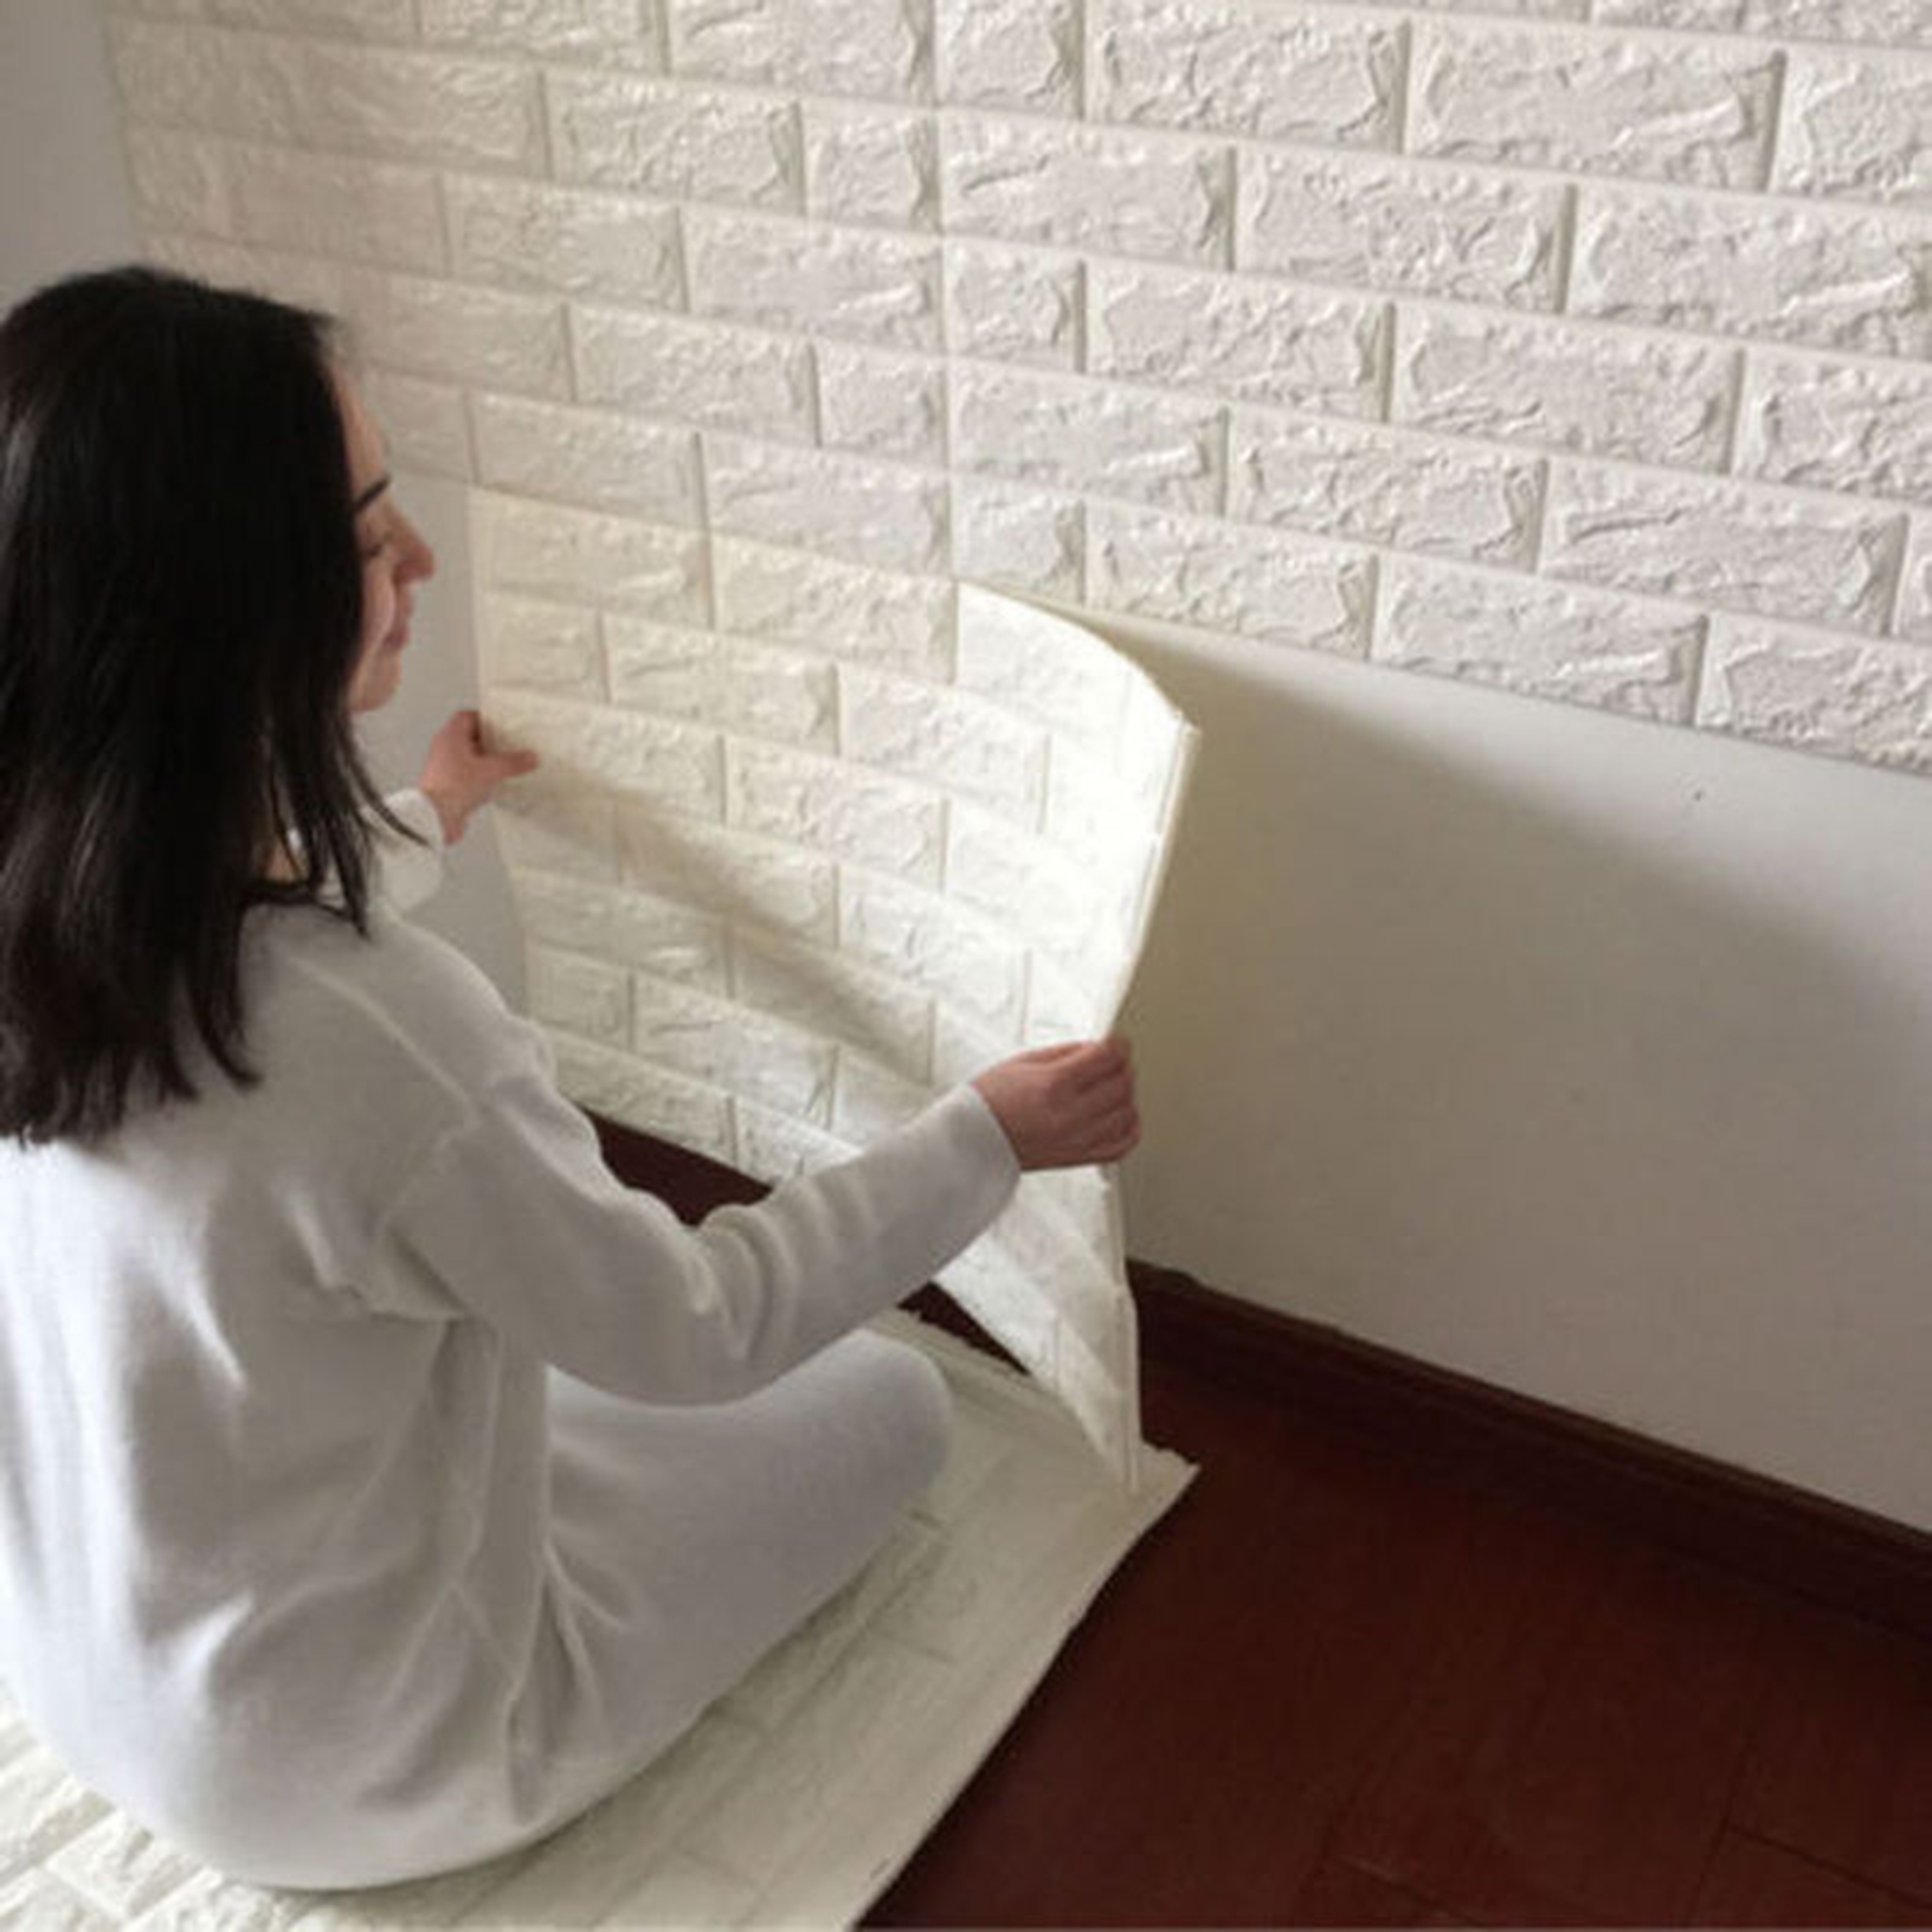 White Foam Brick 3D Wall Panels Peel and Stick Wallpaper Adhesive Textured Brick Tiles Waterproof Brick Pattern Wall Stickers Bedroom Living Room Background Decorative for Home Decor - image 1 of 7